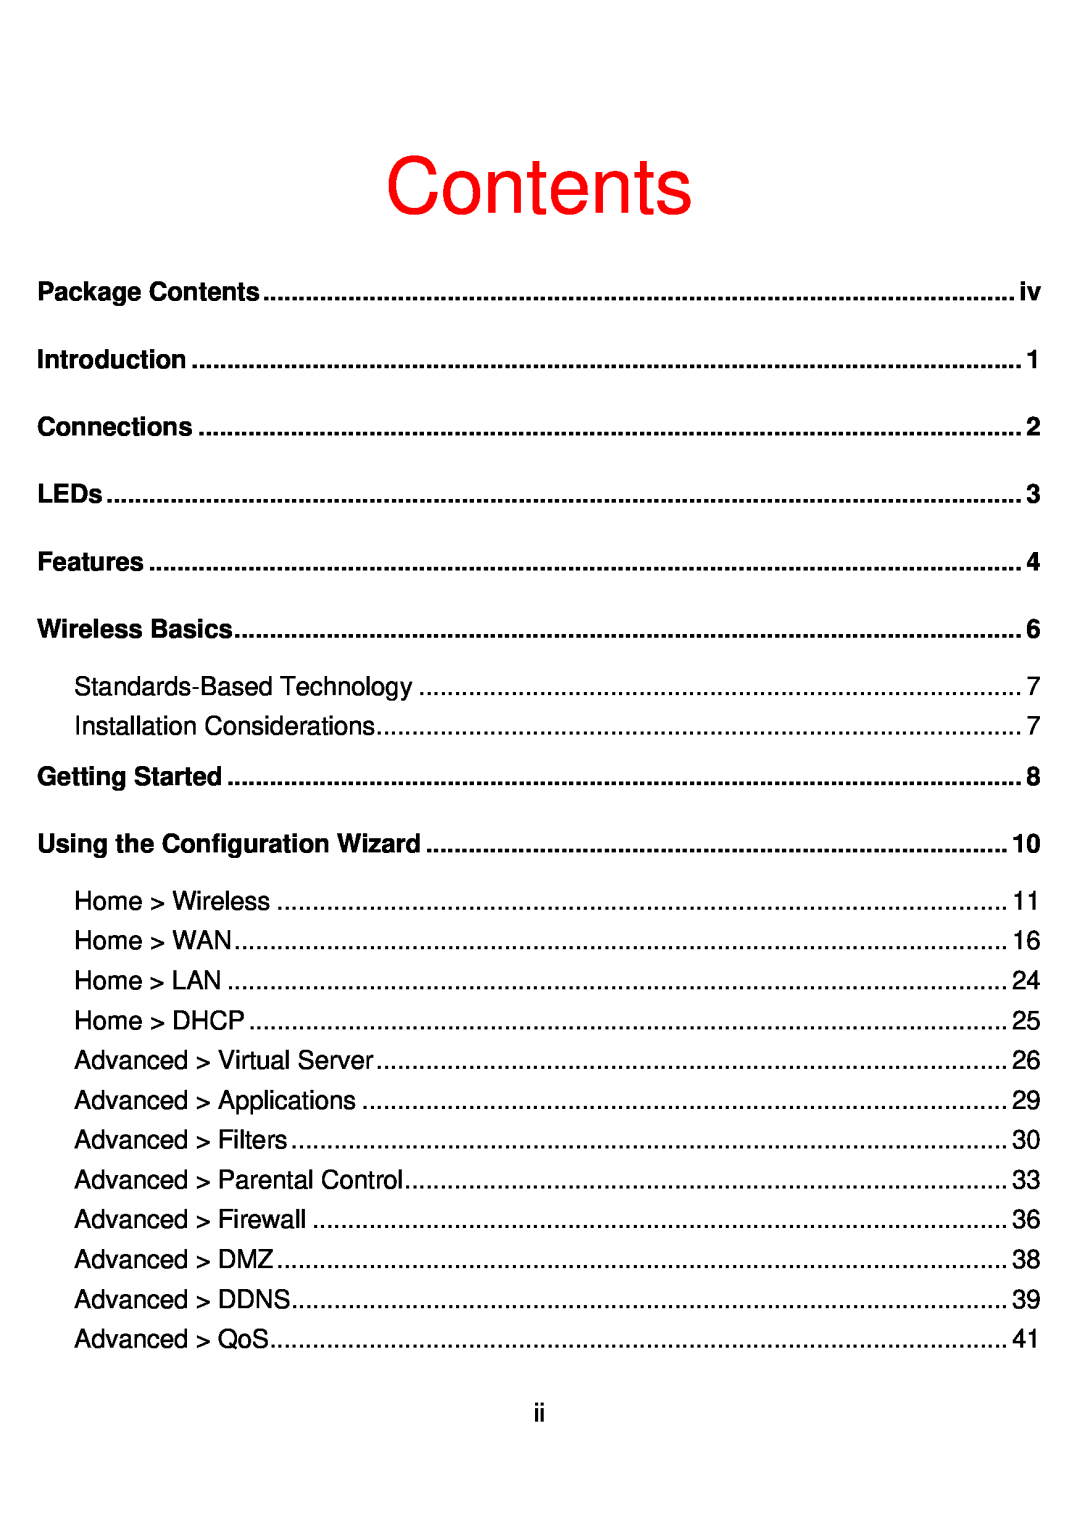 D-Link DI-524UP manual Package Contents, Introduction, Connections, LEDs, Features, Wireless Basics, Getting Started 